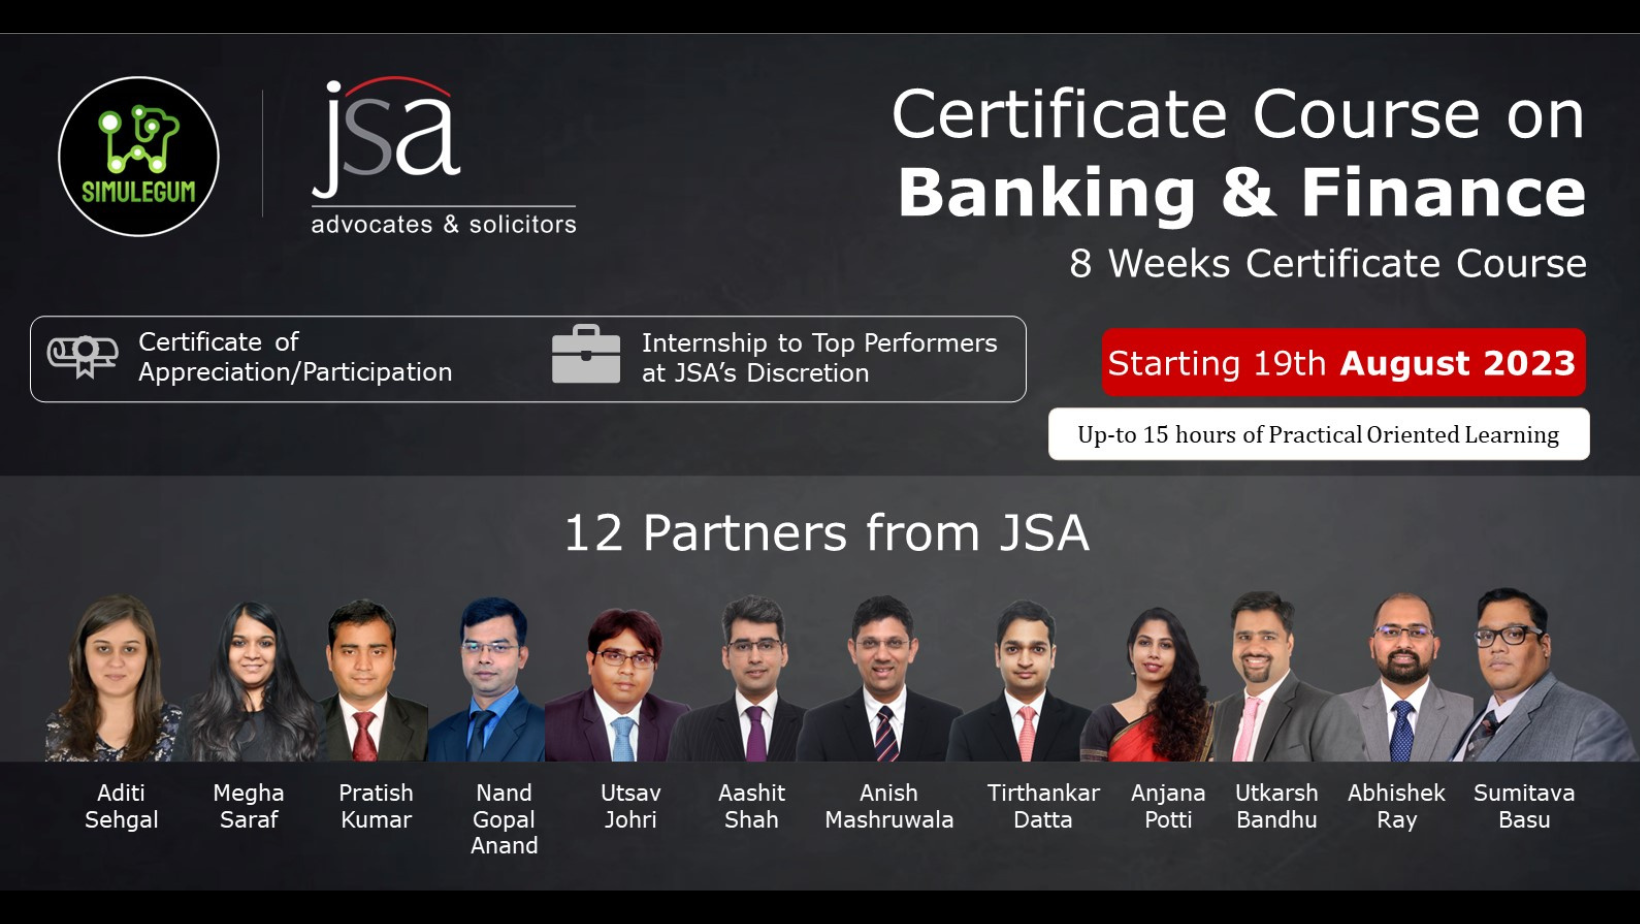 Certificate Course on Banking and Finance by JSA and Simulegum